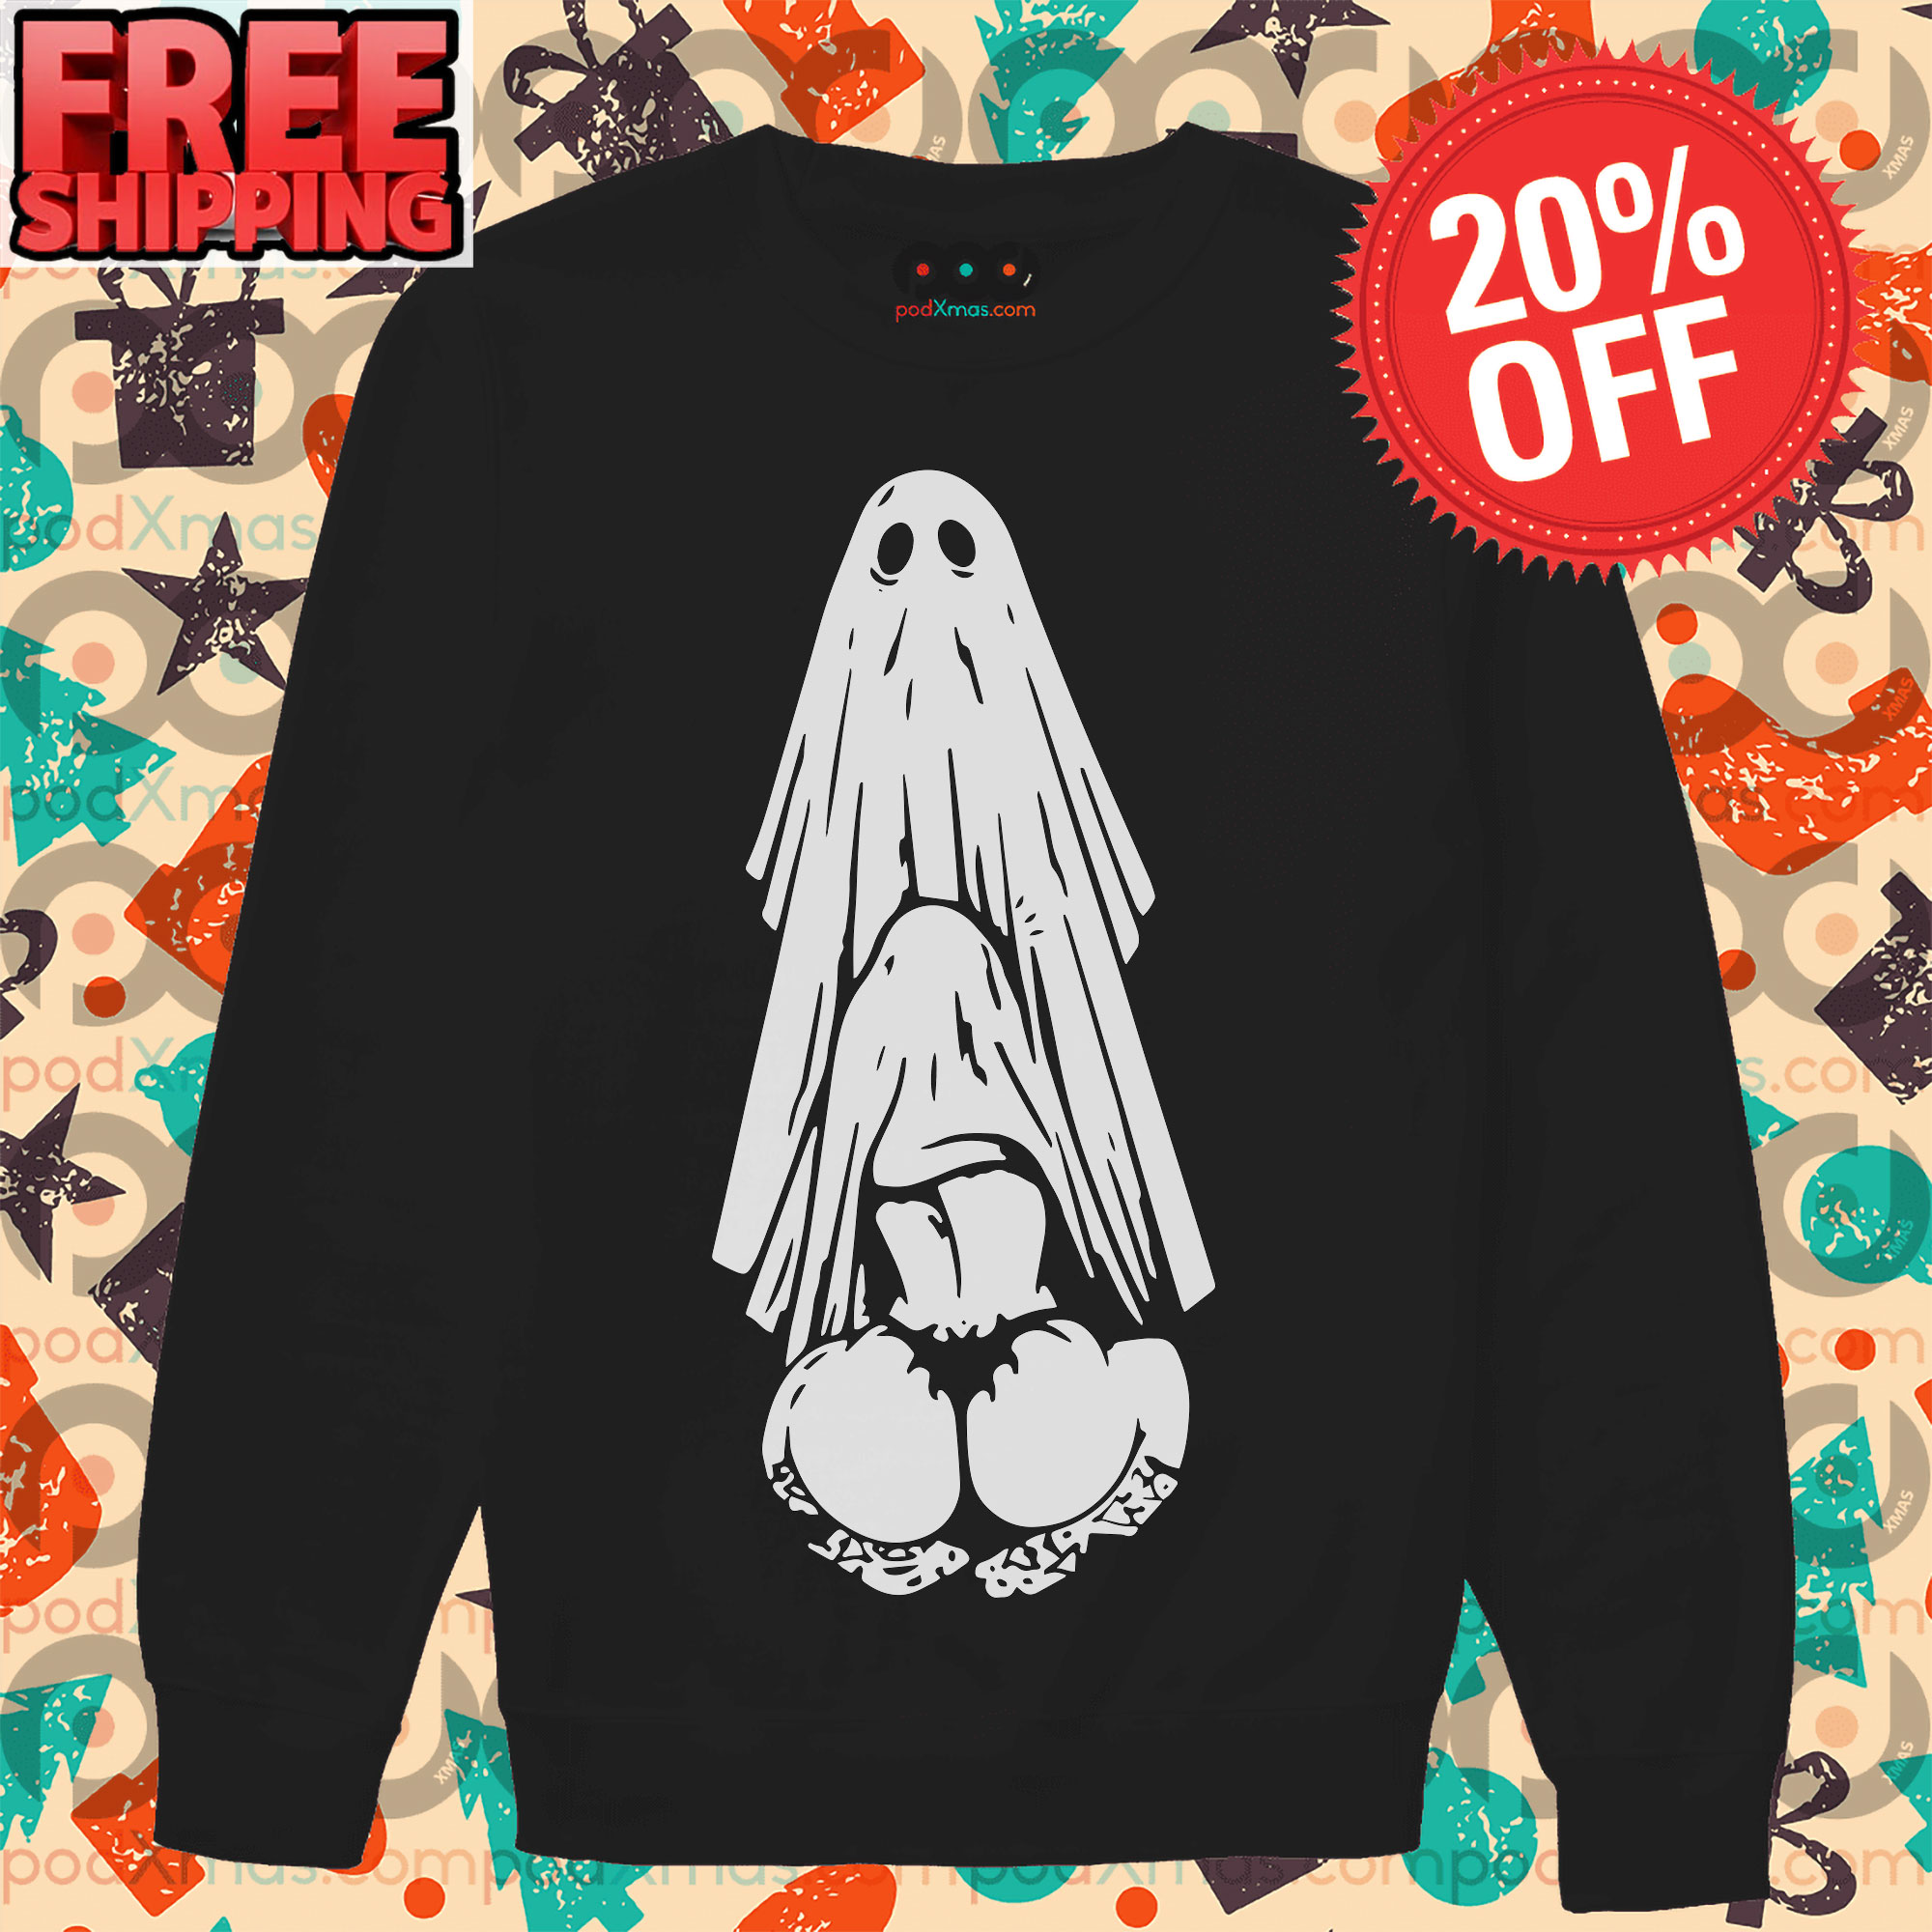 Graphic America Funny Spooky Halloween Men's Graphic T-Shirt Collection 